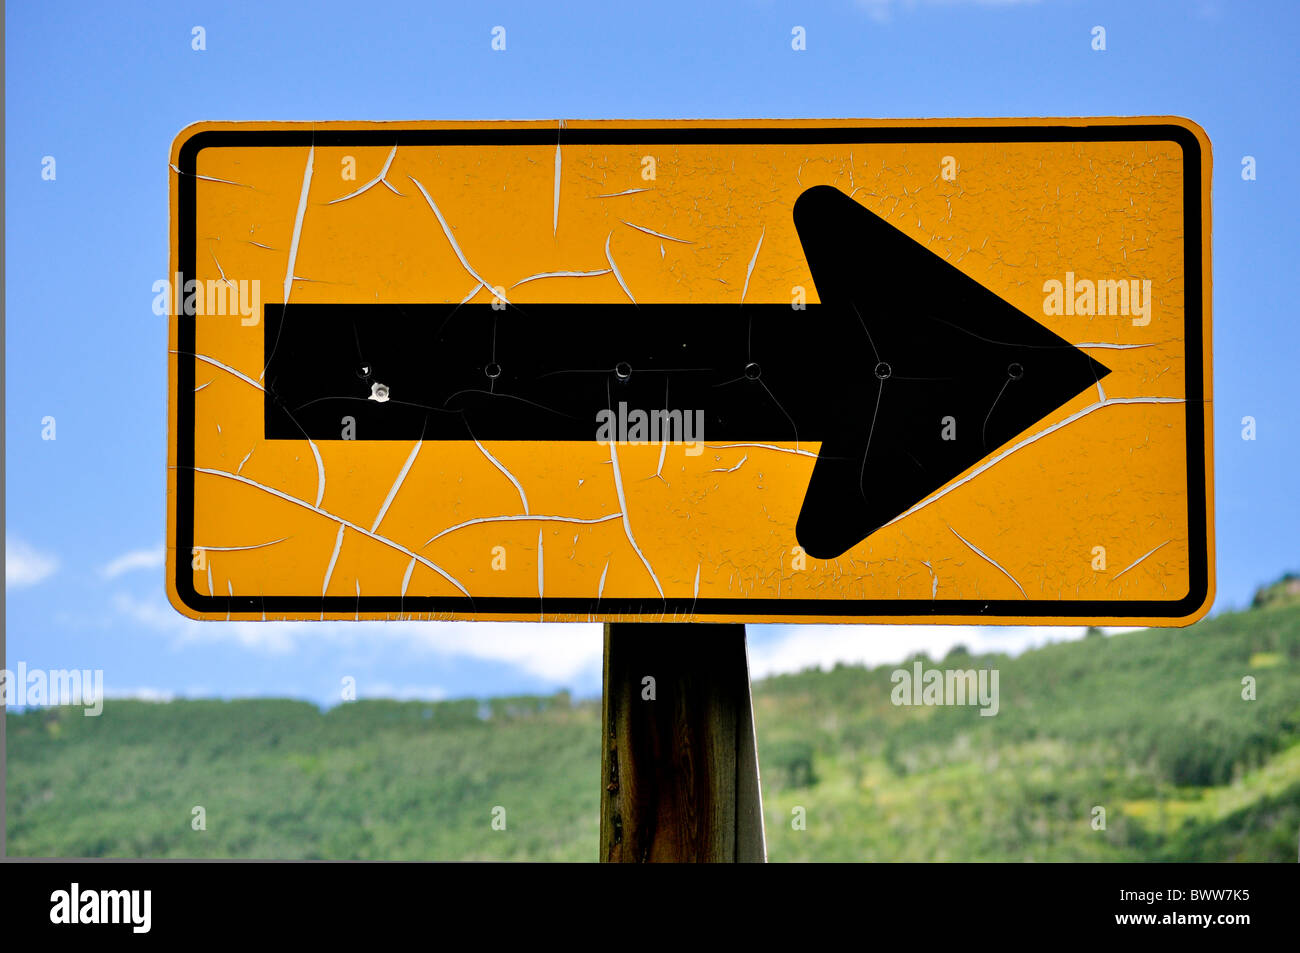 arrow directional road sign Stock Photo